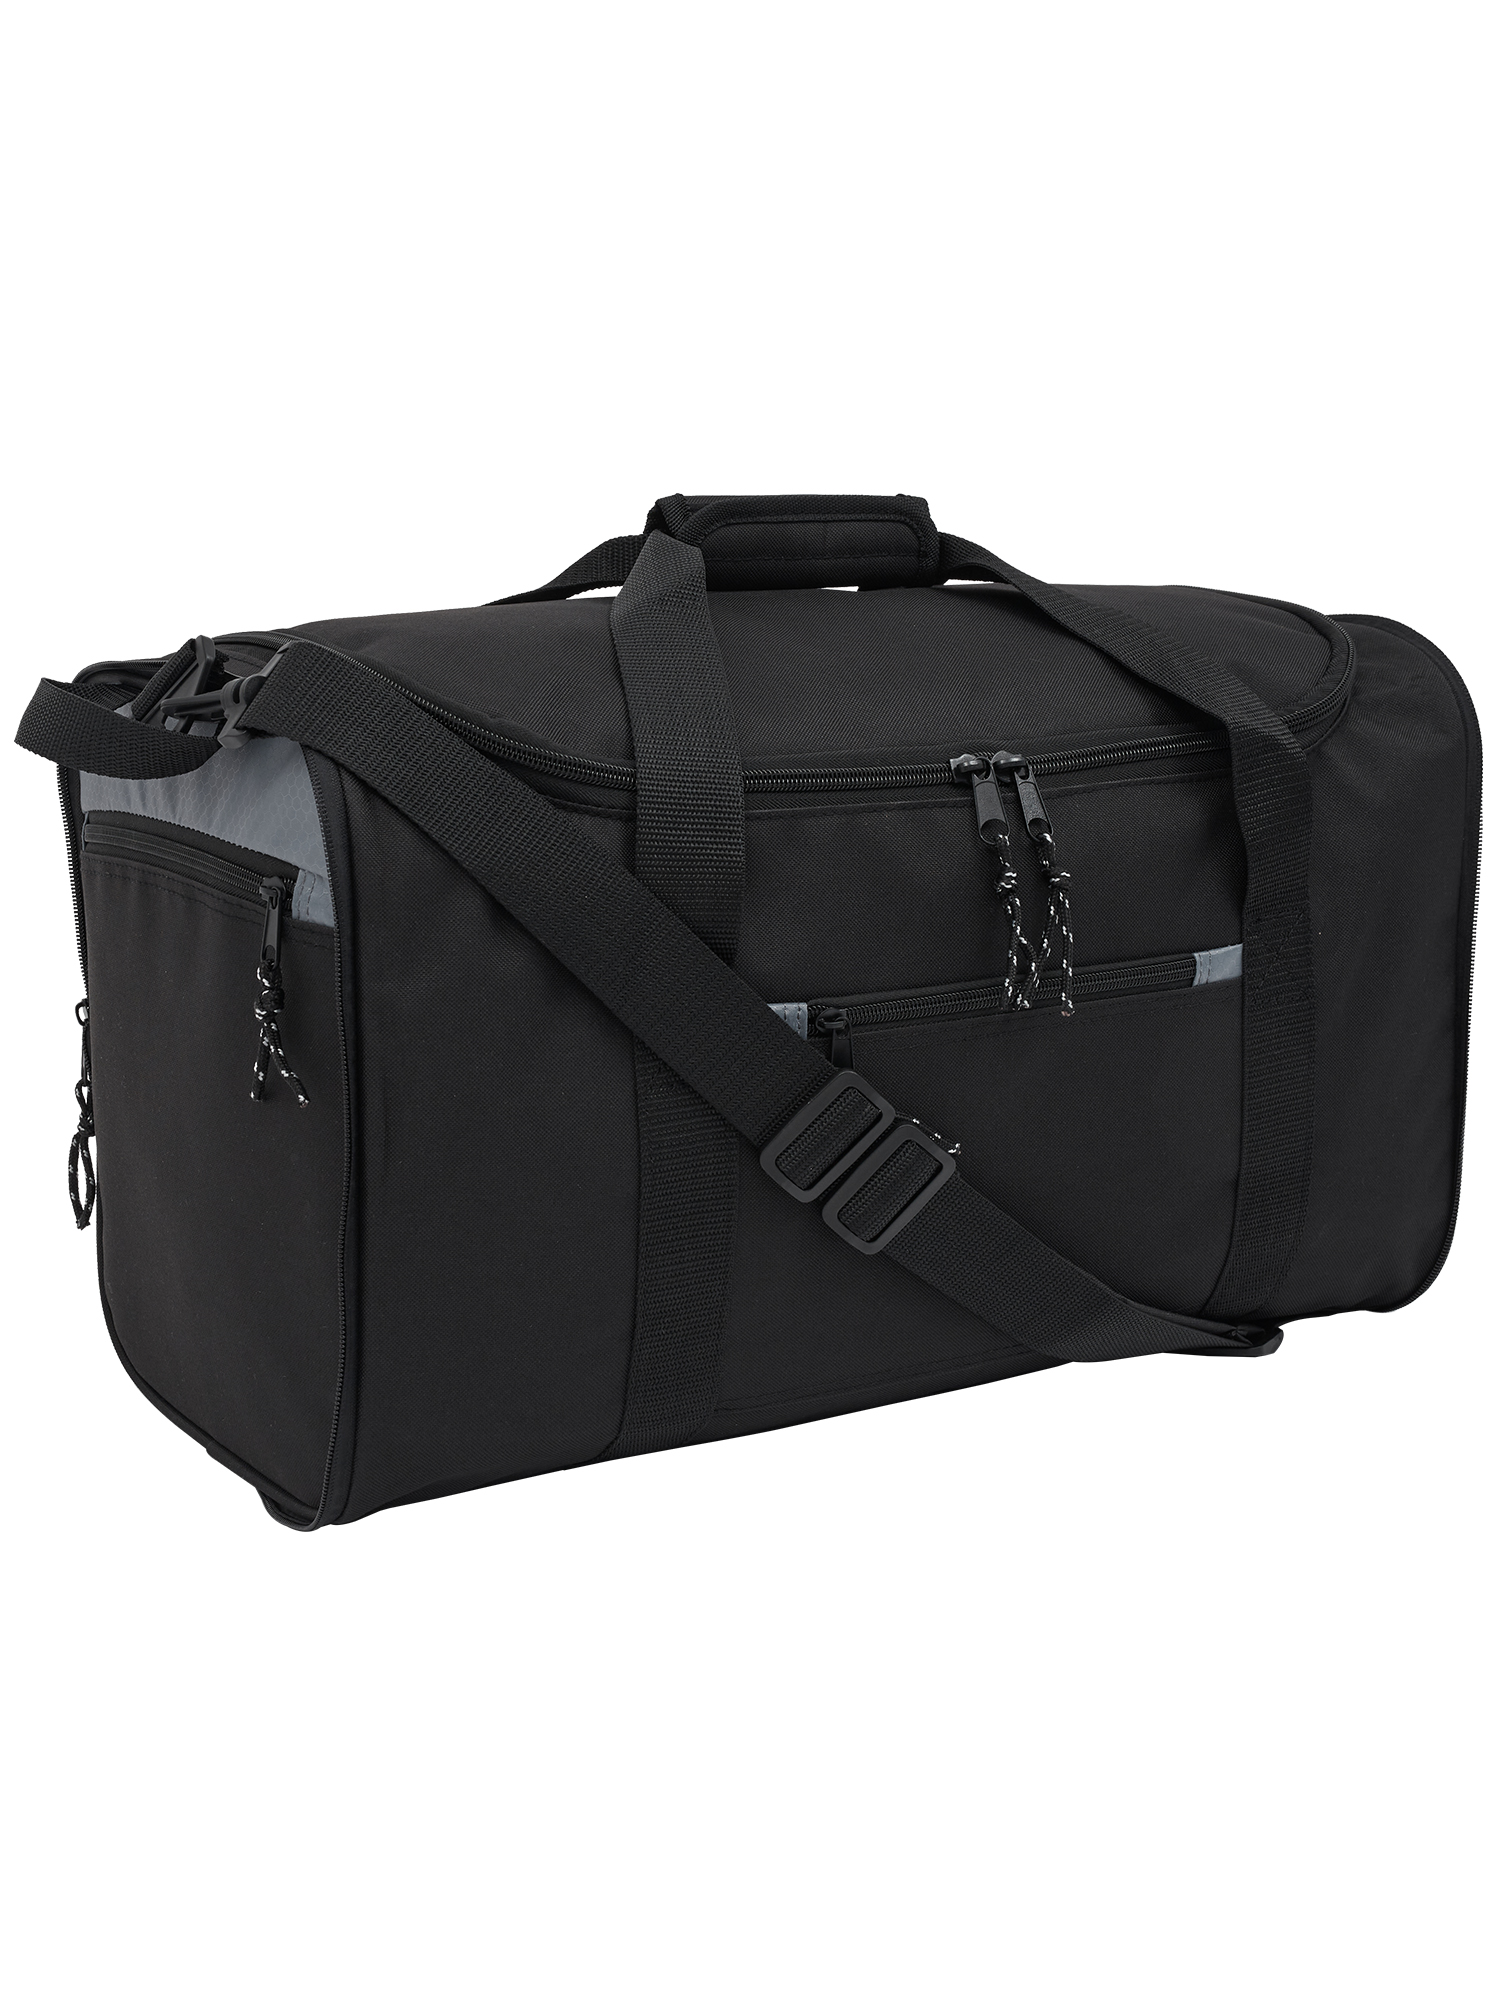 Protégé 20" Collapsible Sport and Travel Duffel Bag, Black - image 3 of 9